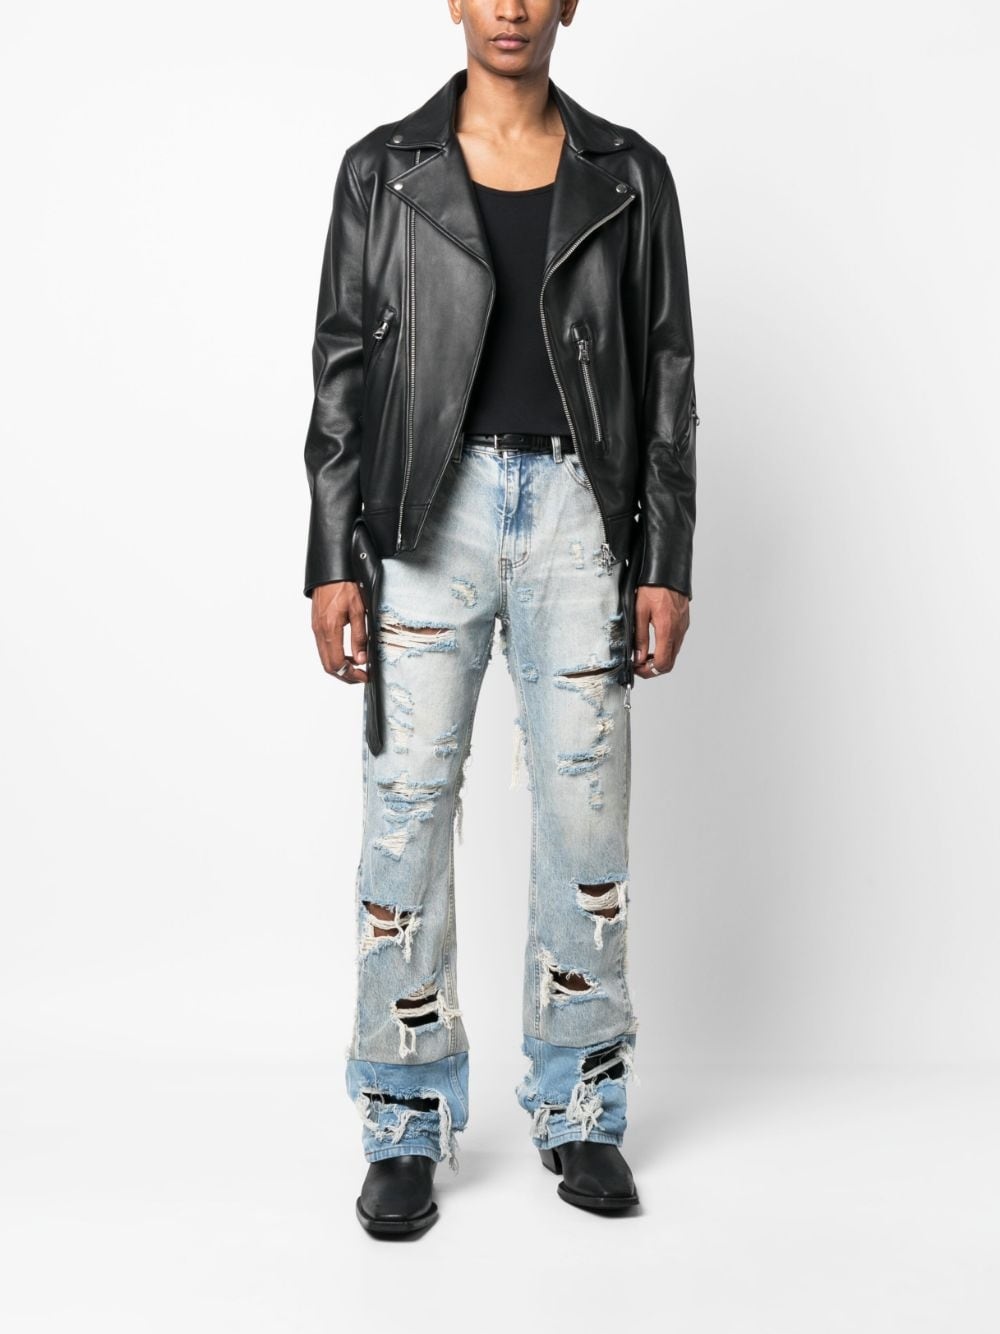 Gnarly distressed jeans - 2